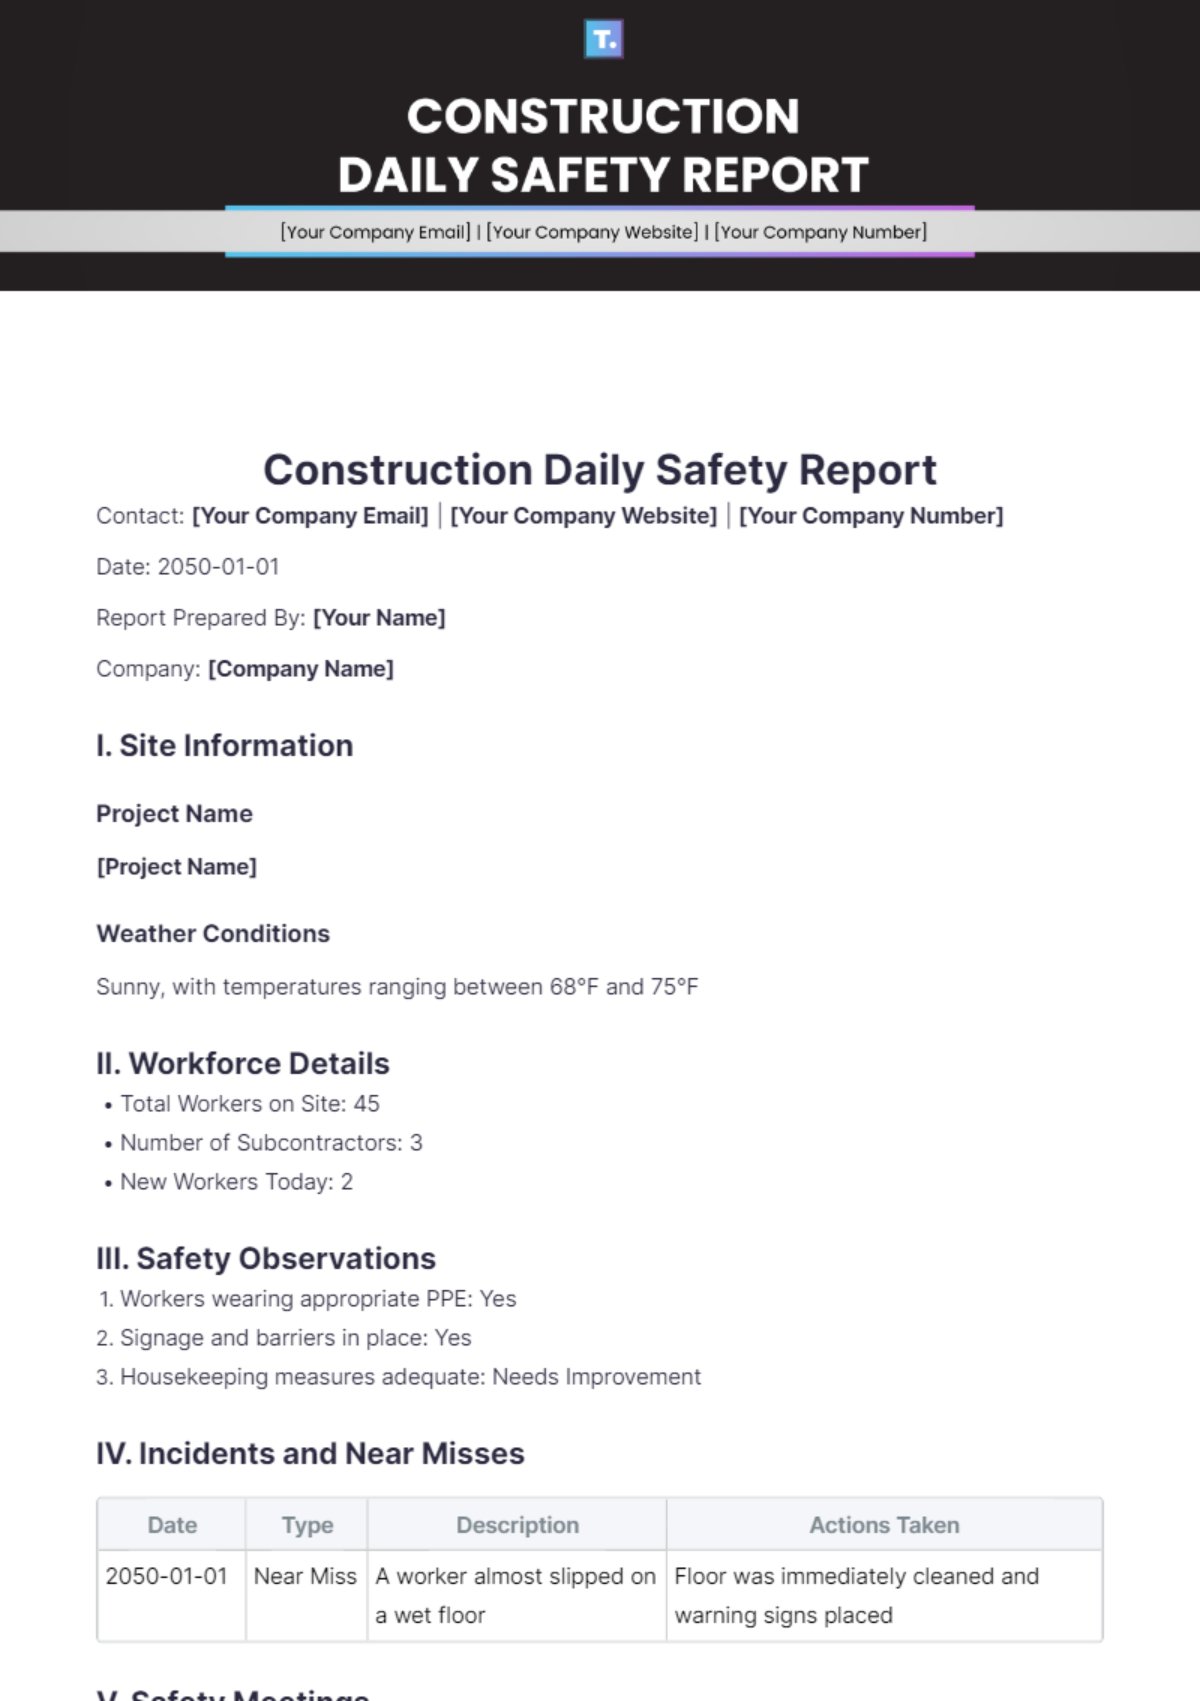 Construction Daily Safety Report Template Edit Online Download